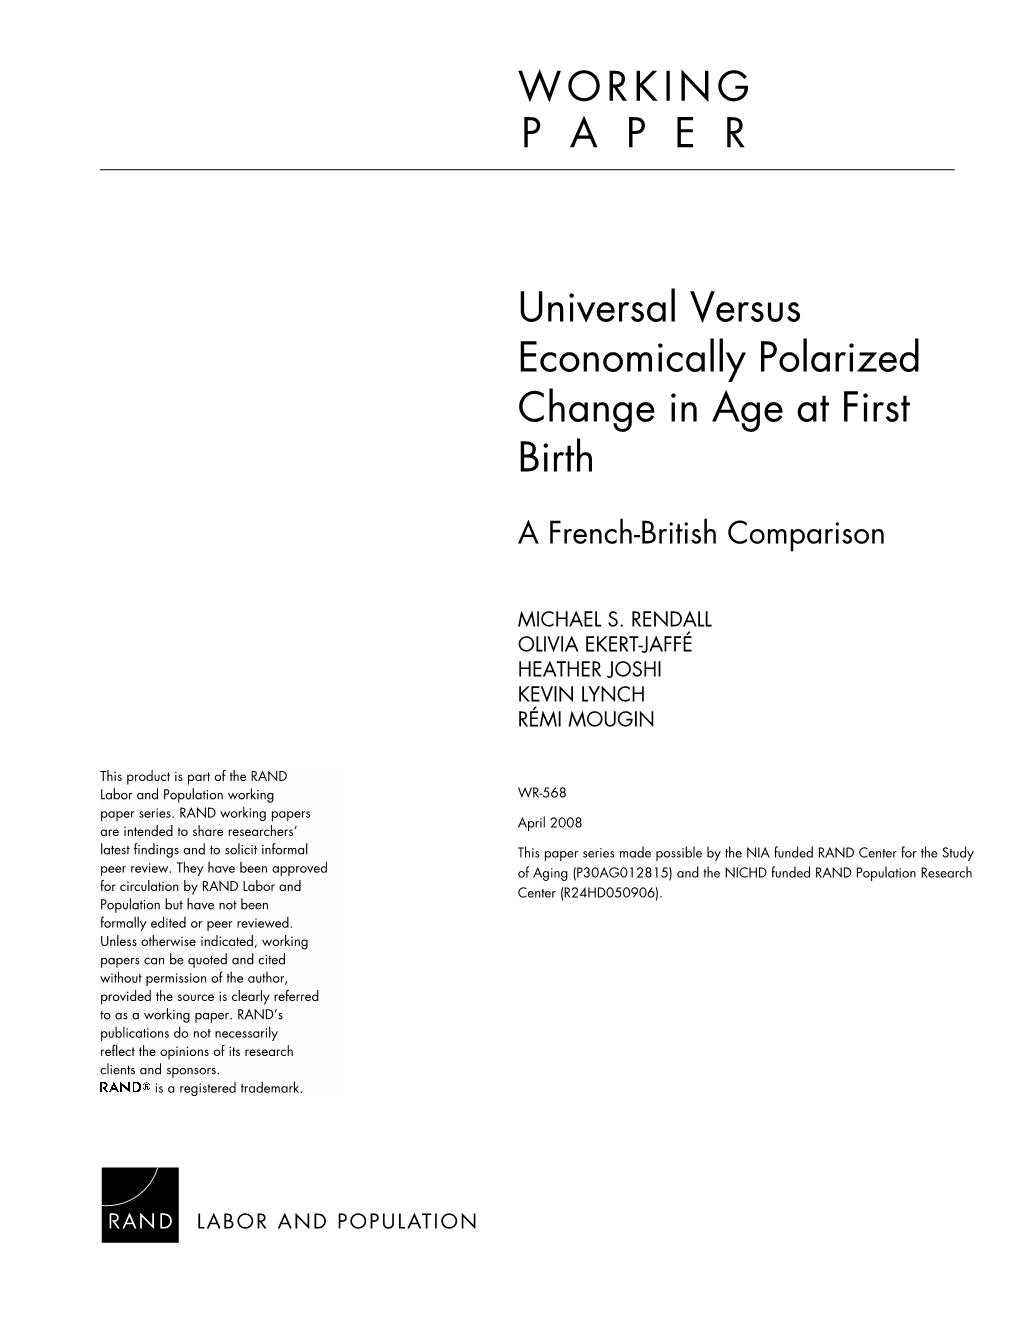 Universal Versus Economically Polarized Change in Age at First Birth